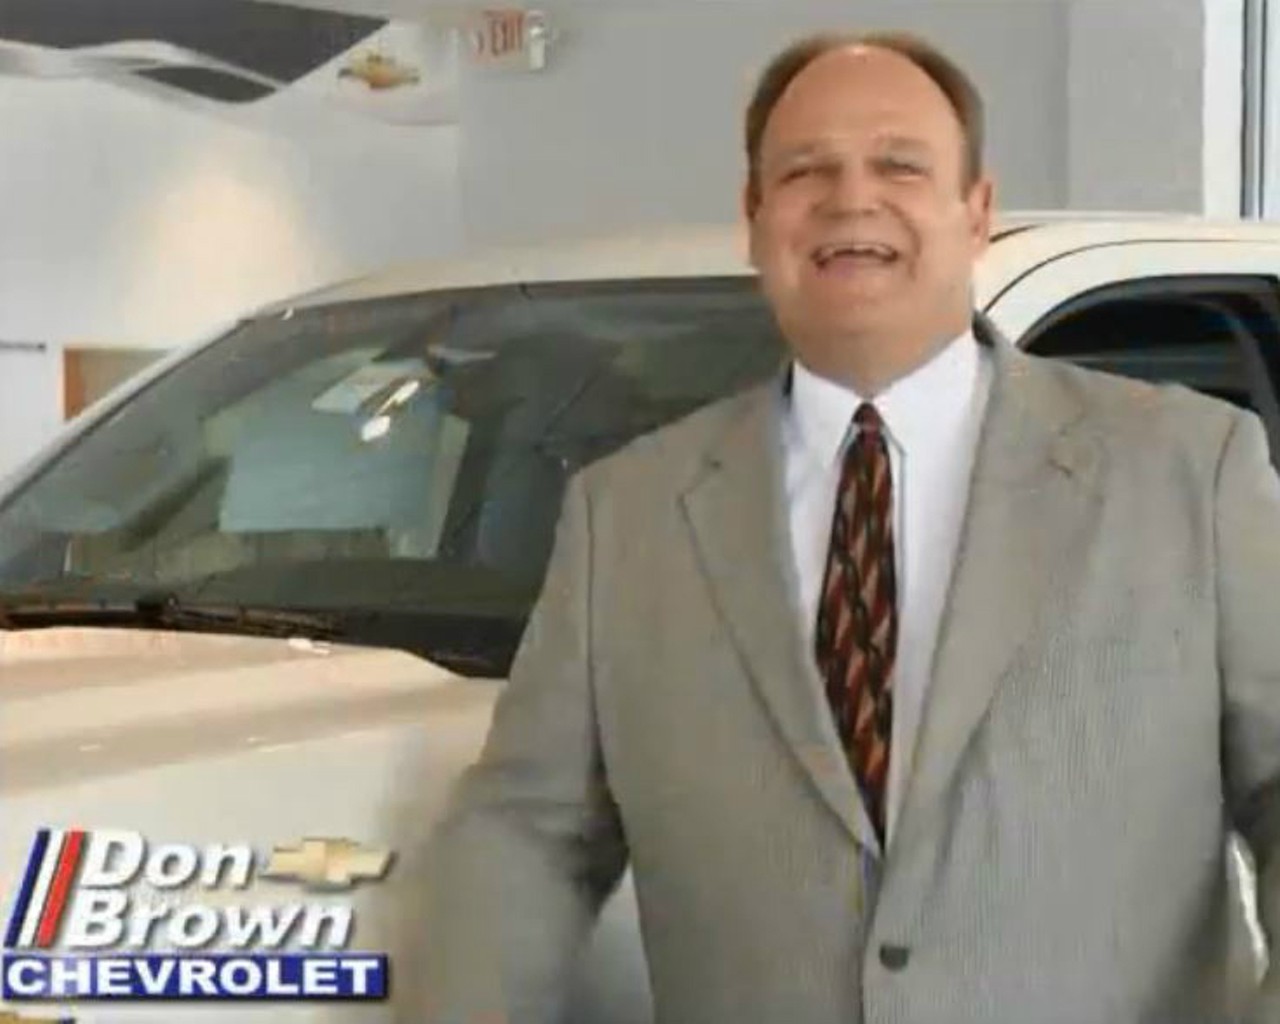 Don Brown, car dealer
"At the entrance to the hill."
Photo credit: screengrab from YouTube